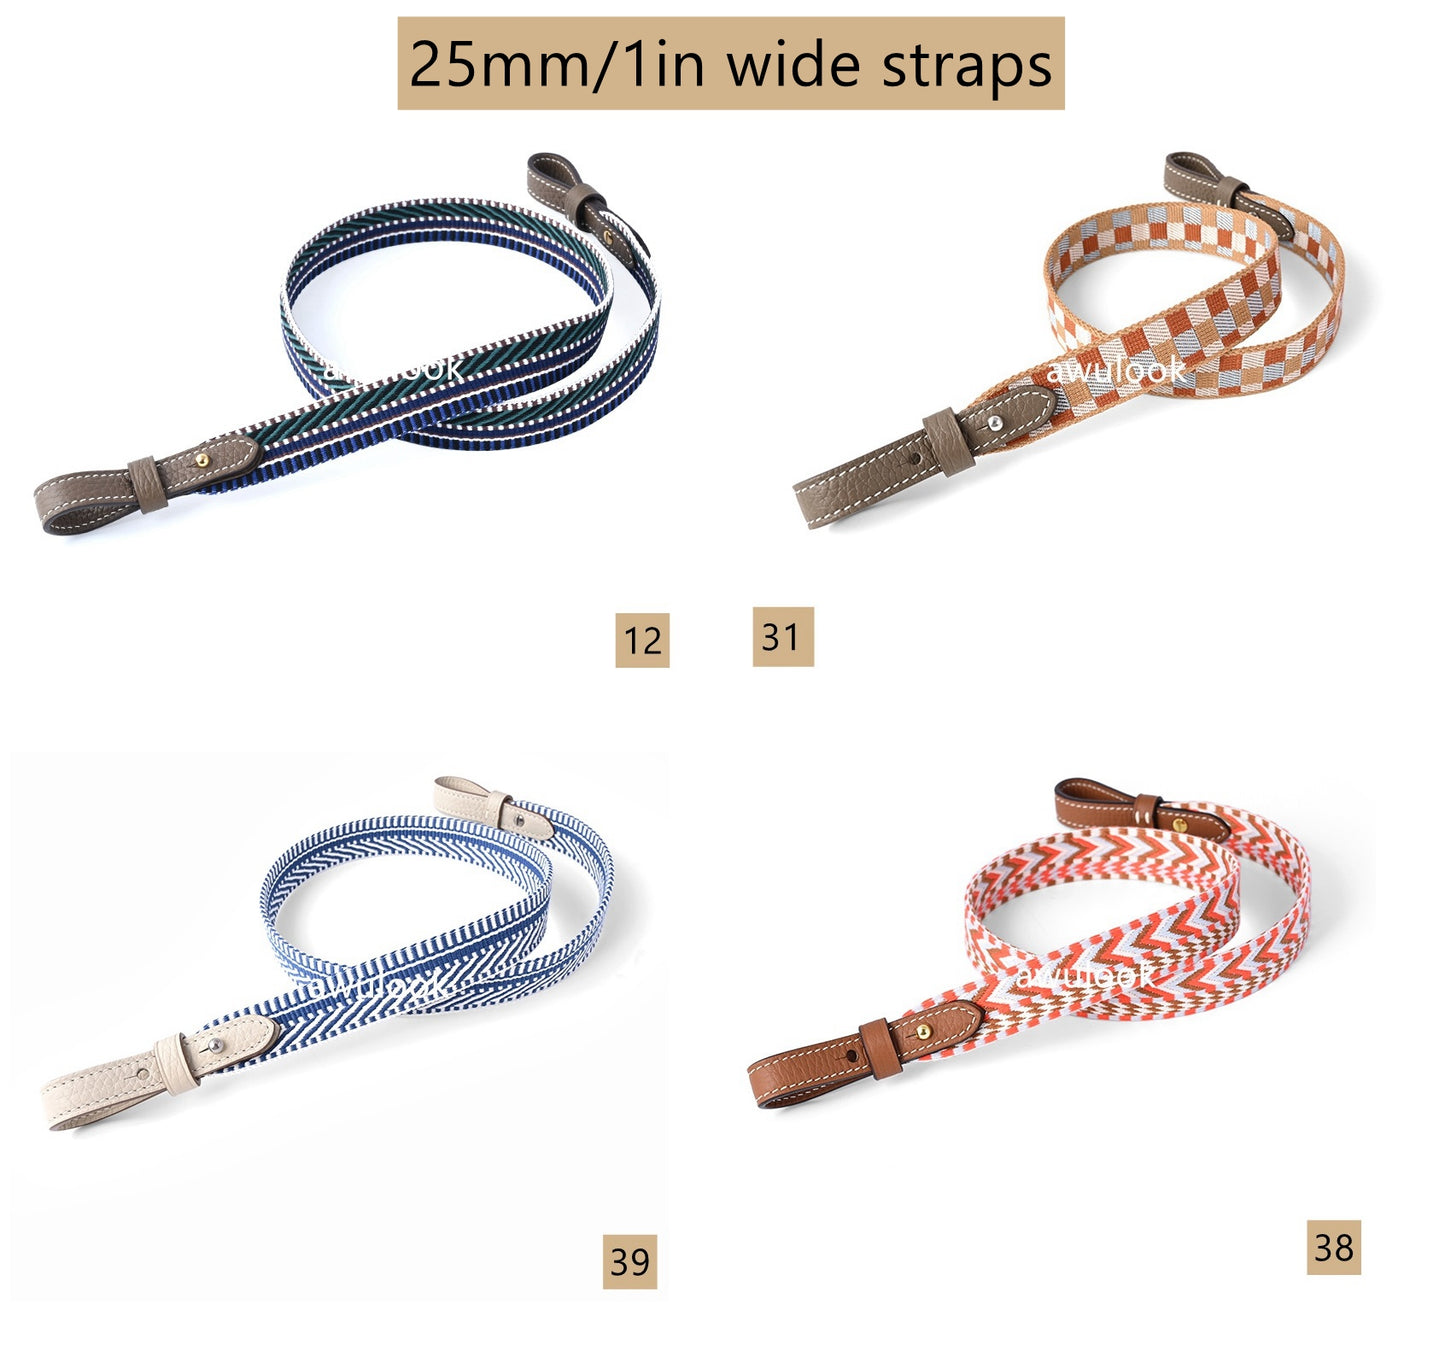 Customized 5cm/2" Widen Canvas Bag Strap for lindy/evelyne/kelly/picotin